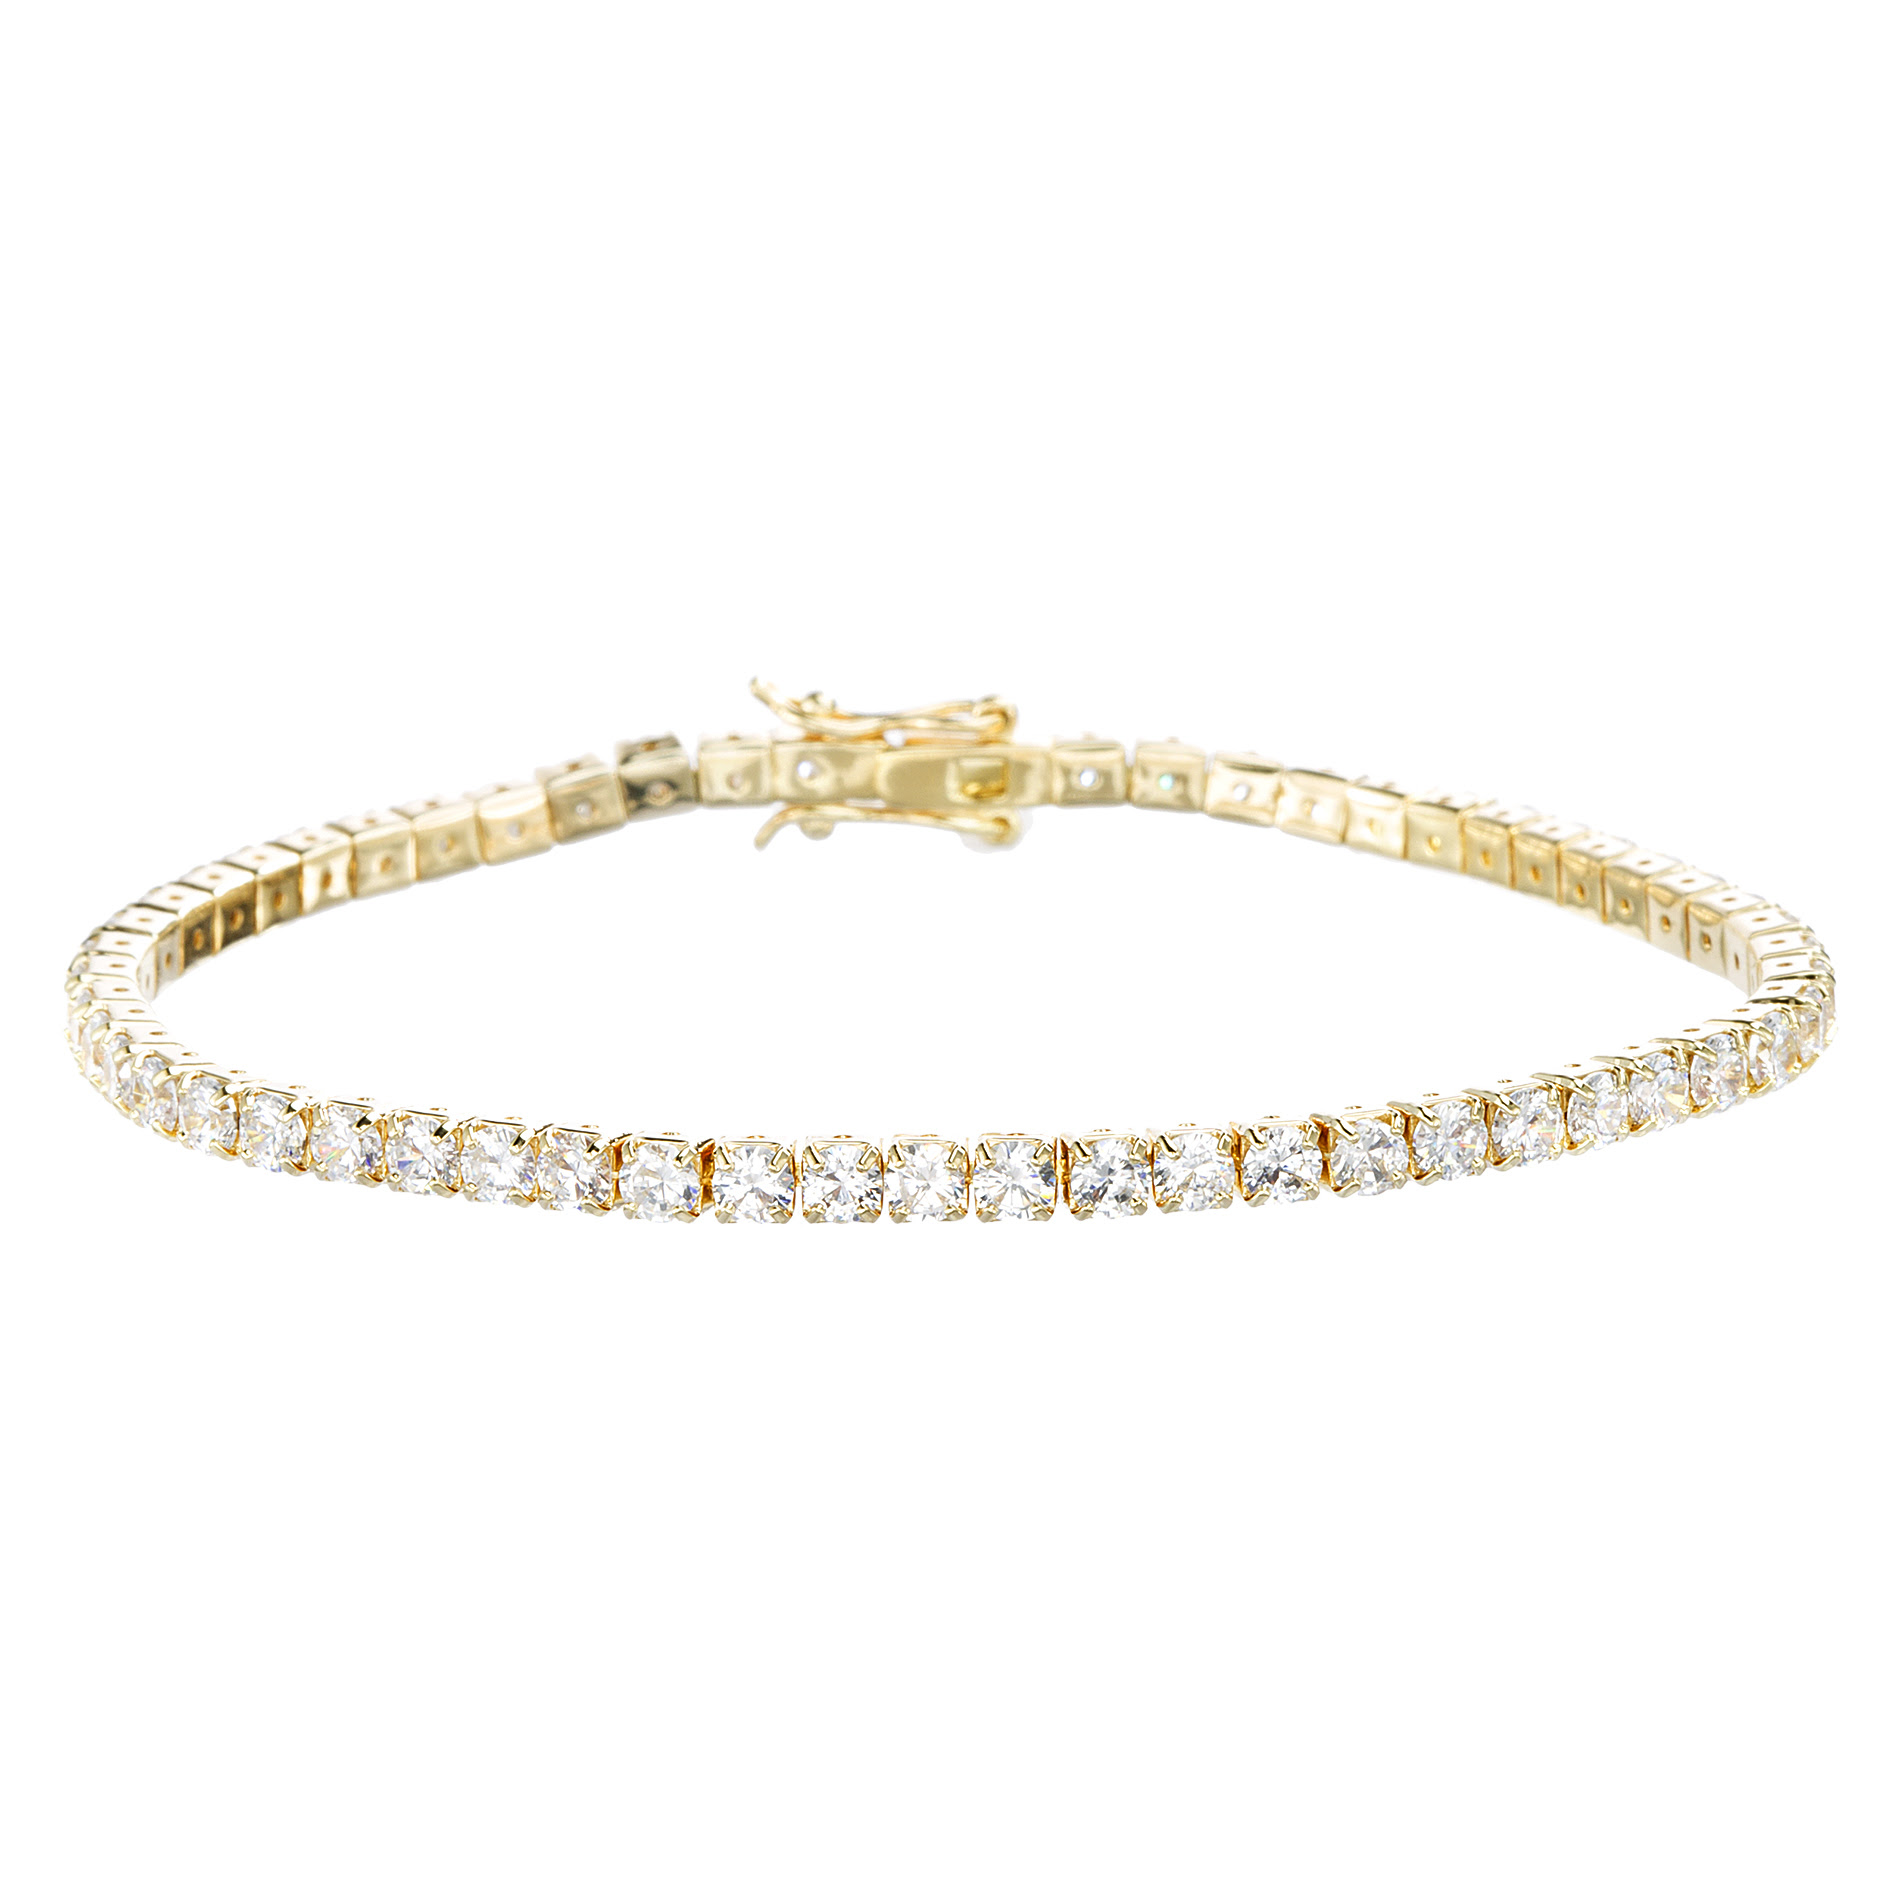 Rope Chain Gold Jewelry Kmart.com | Jewelry Bracelets Collections